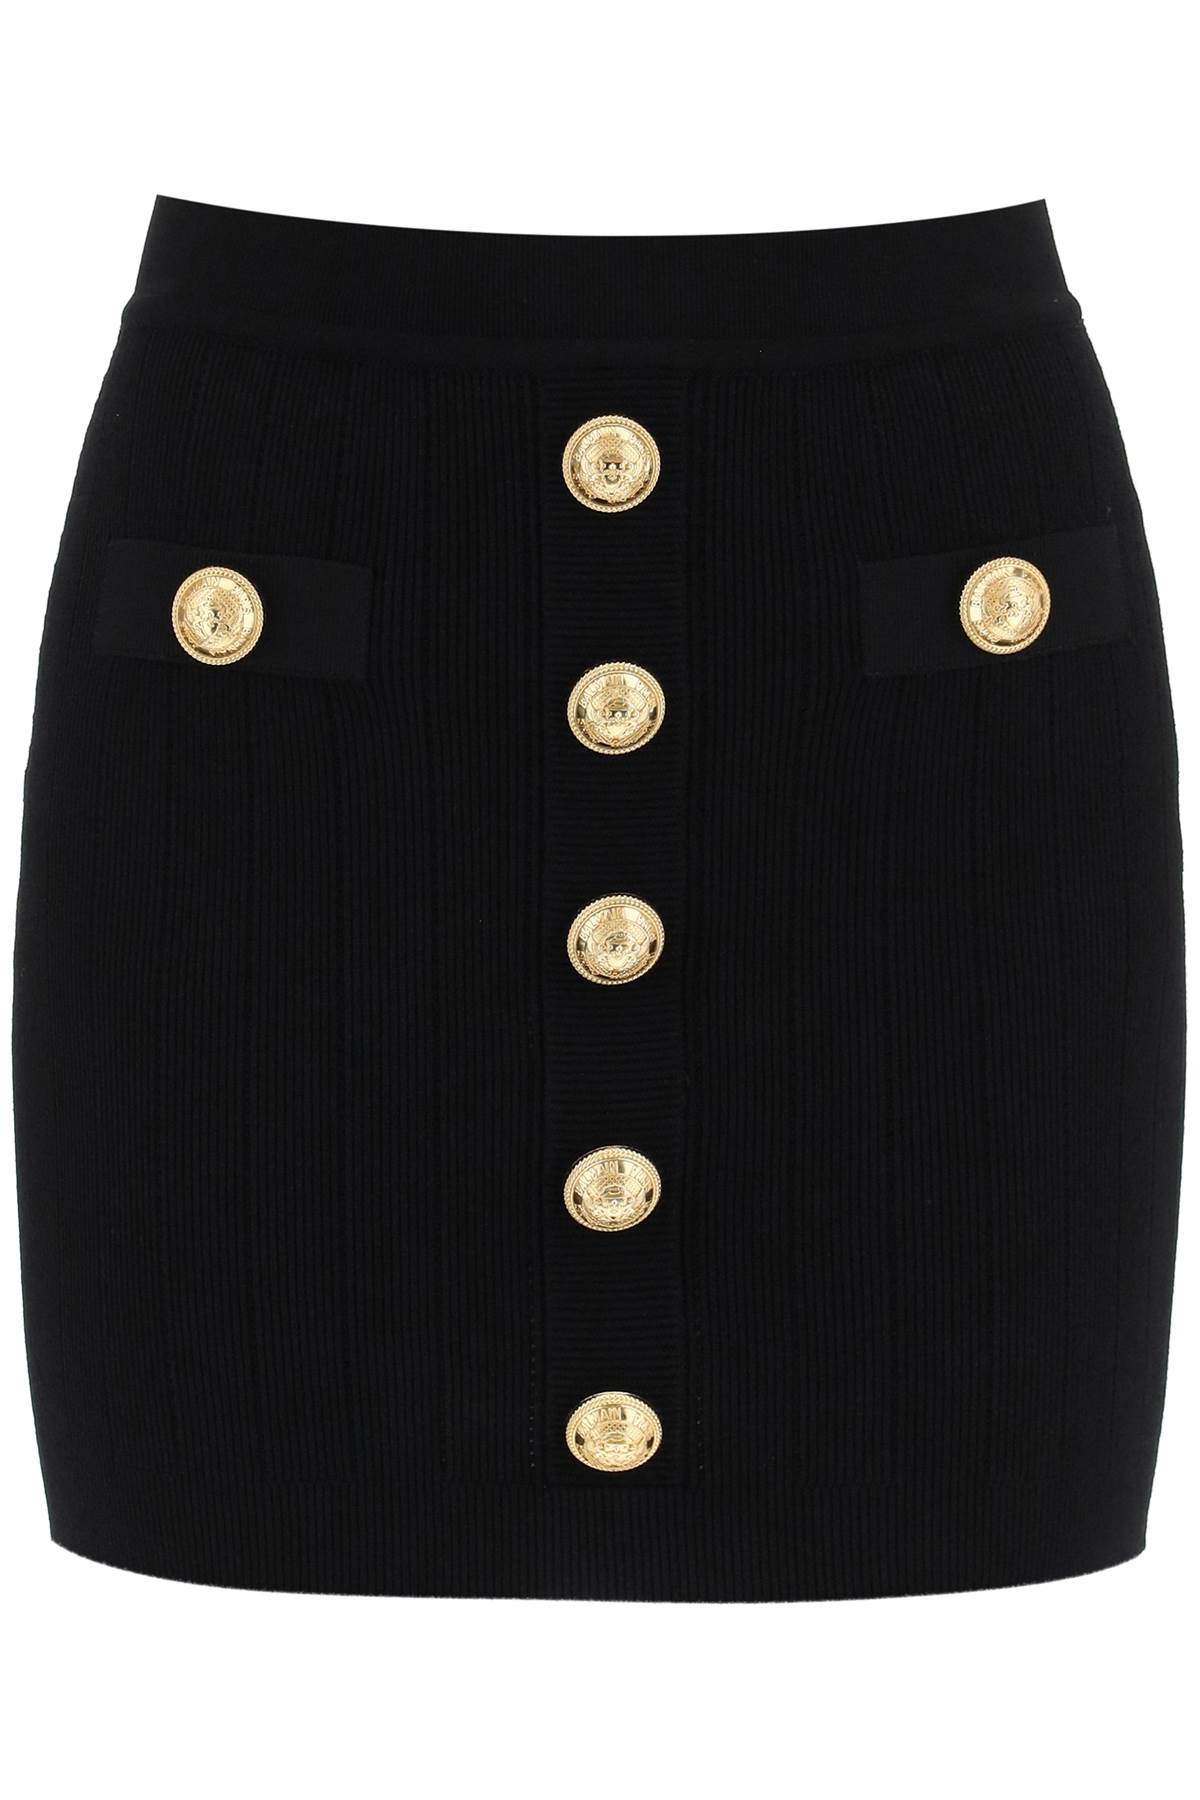 Balmain Knit Mini Skirt With Embossed Buttons In Black